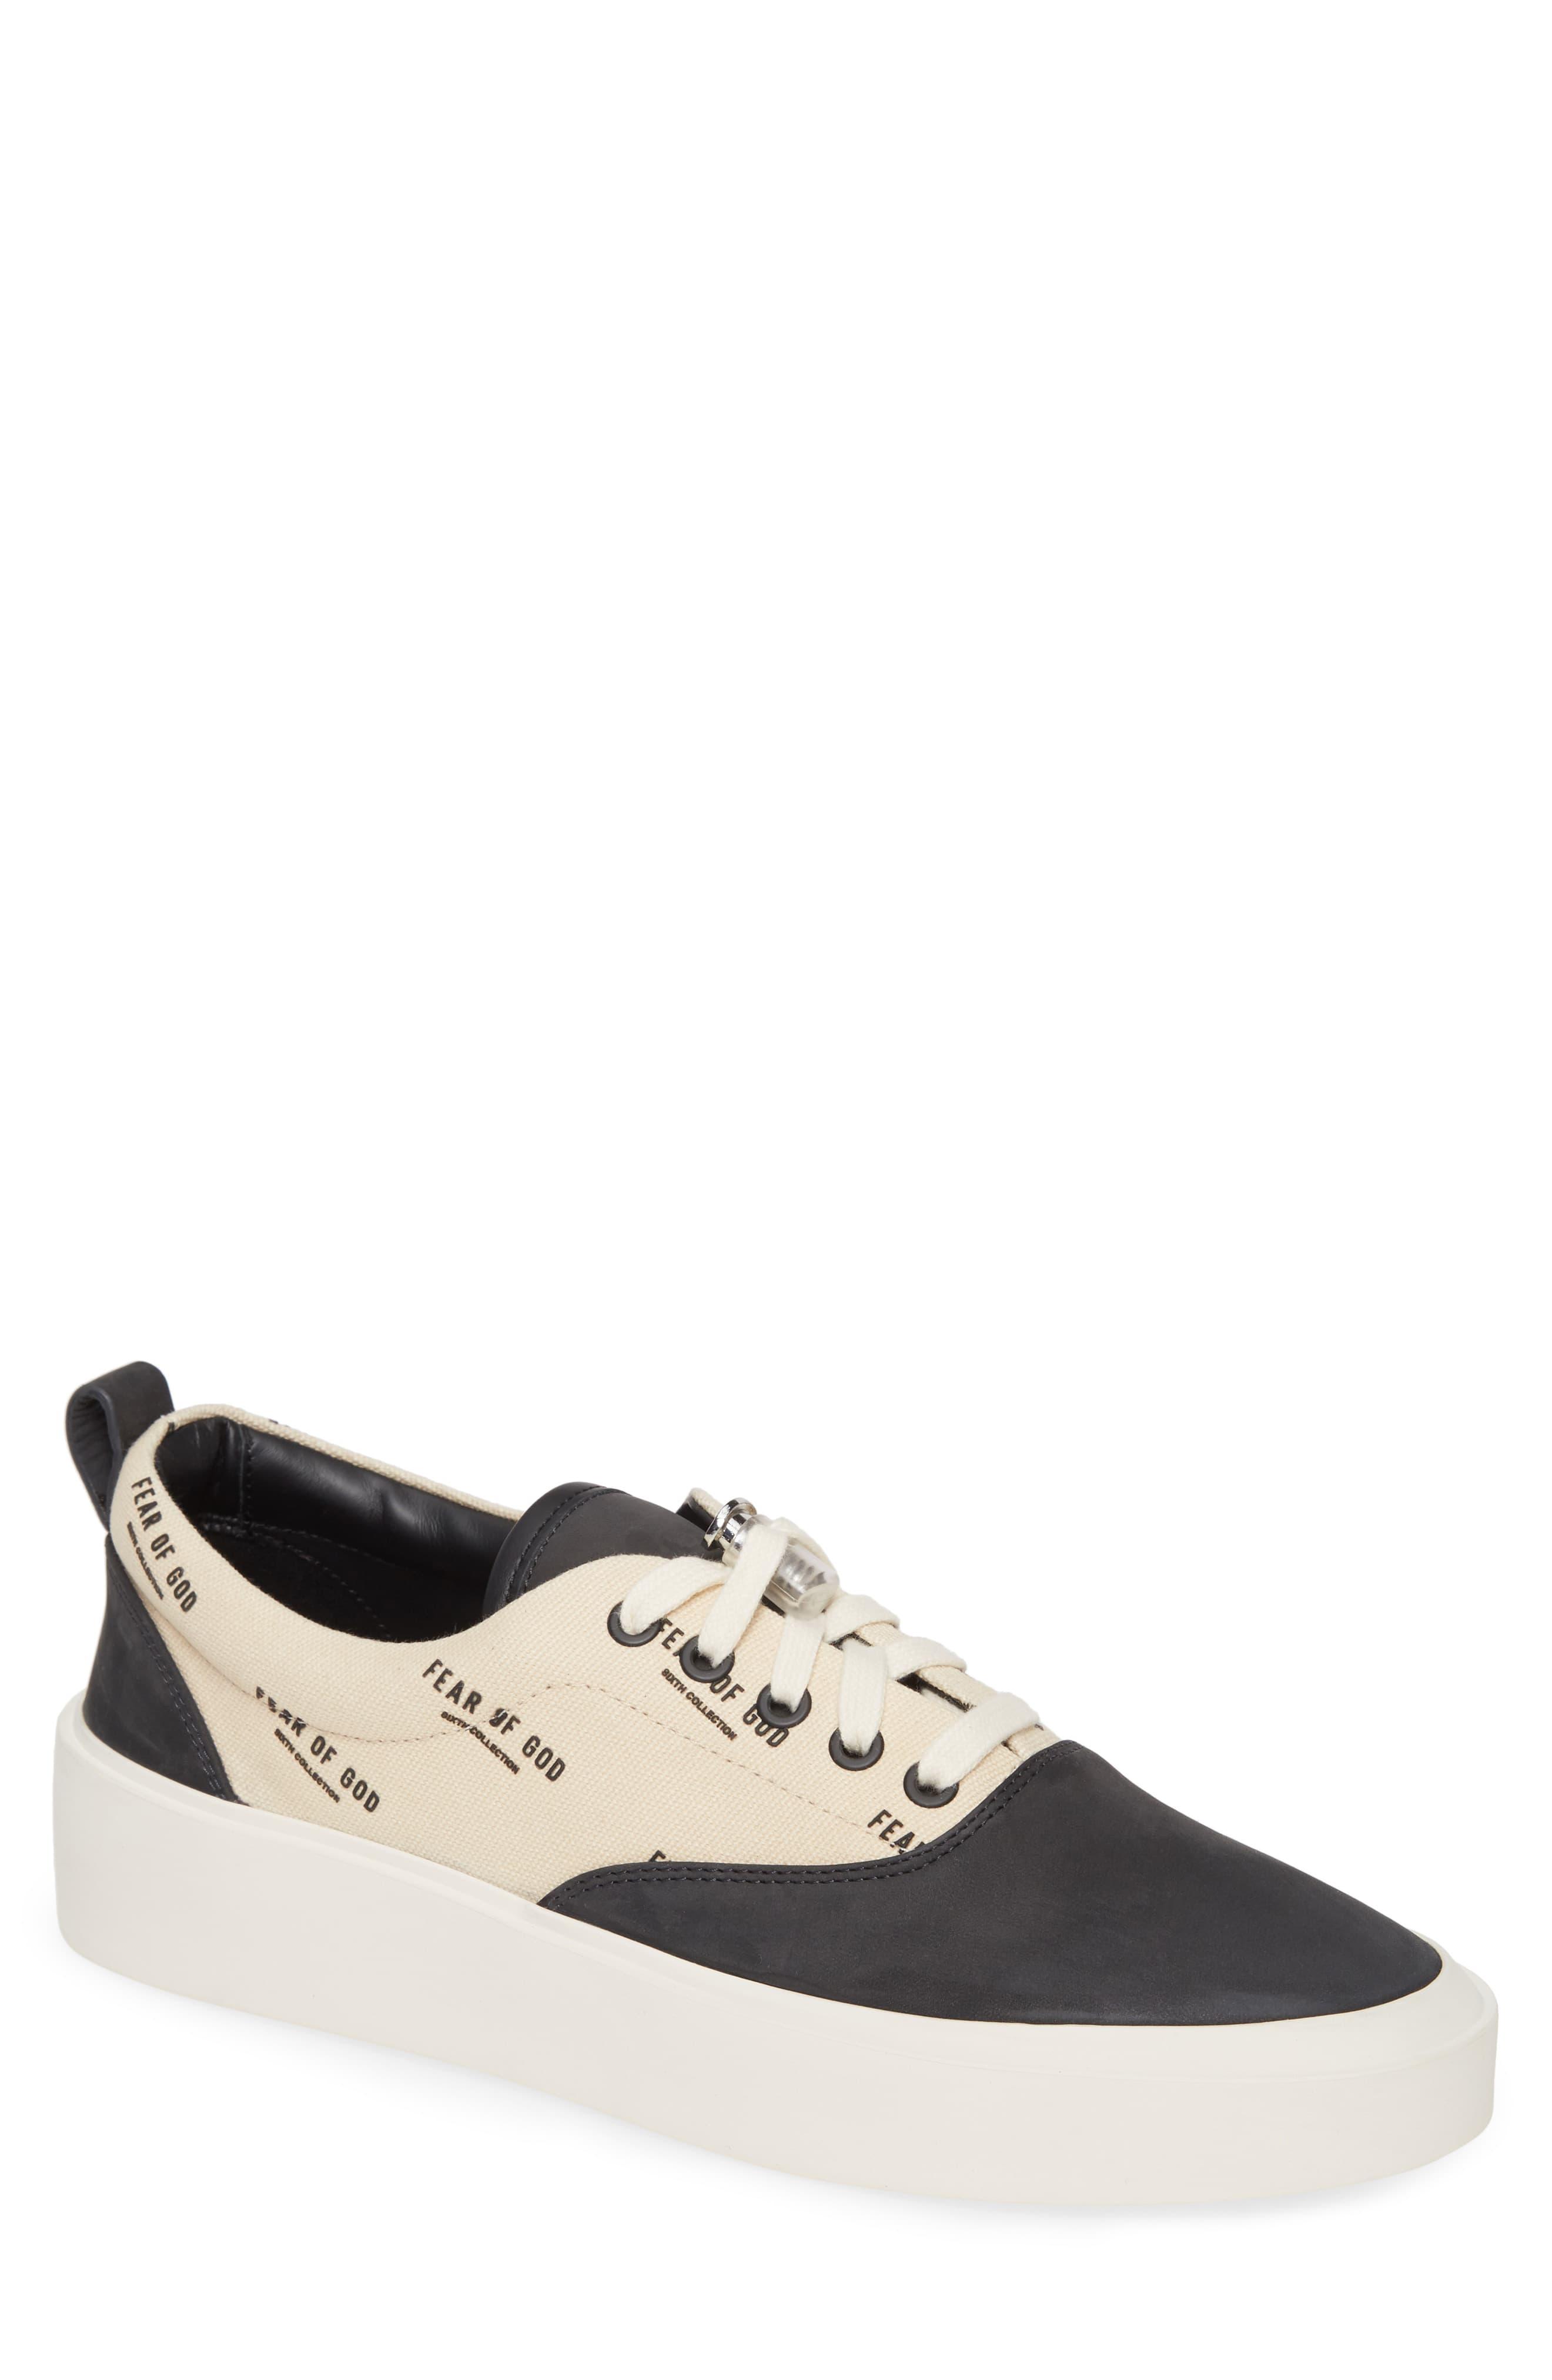 Fear Of God Suede 101 Low Top Sneaker in Black Suede w/ Cream Leather ...